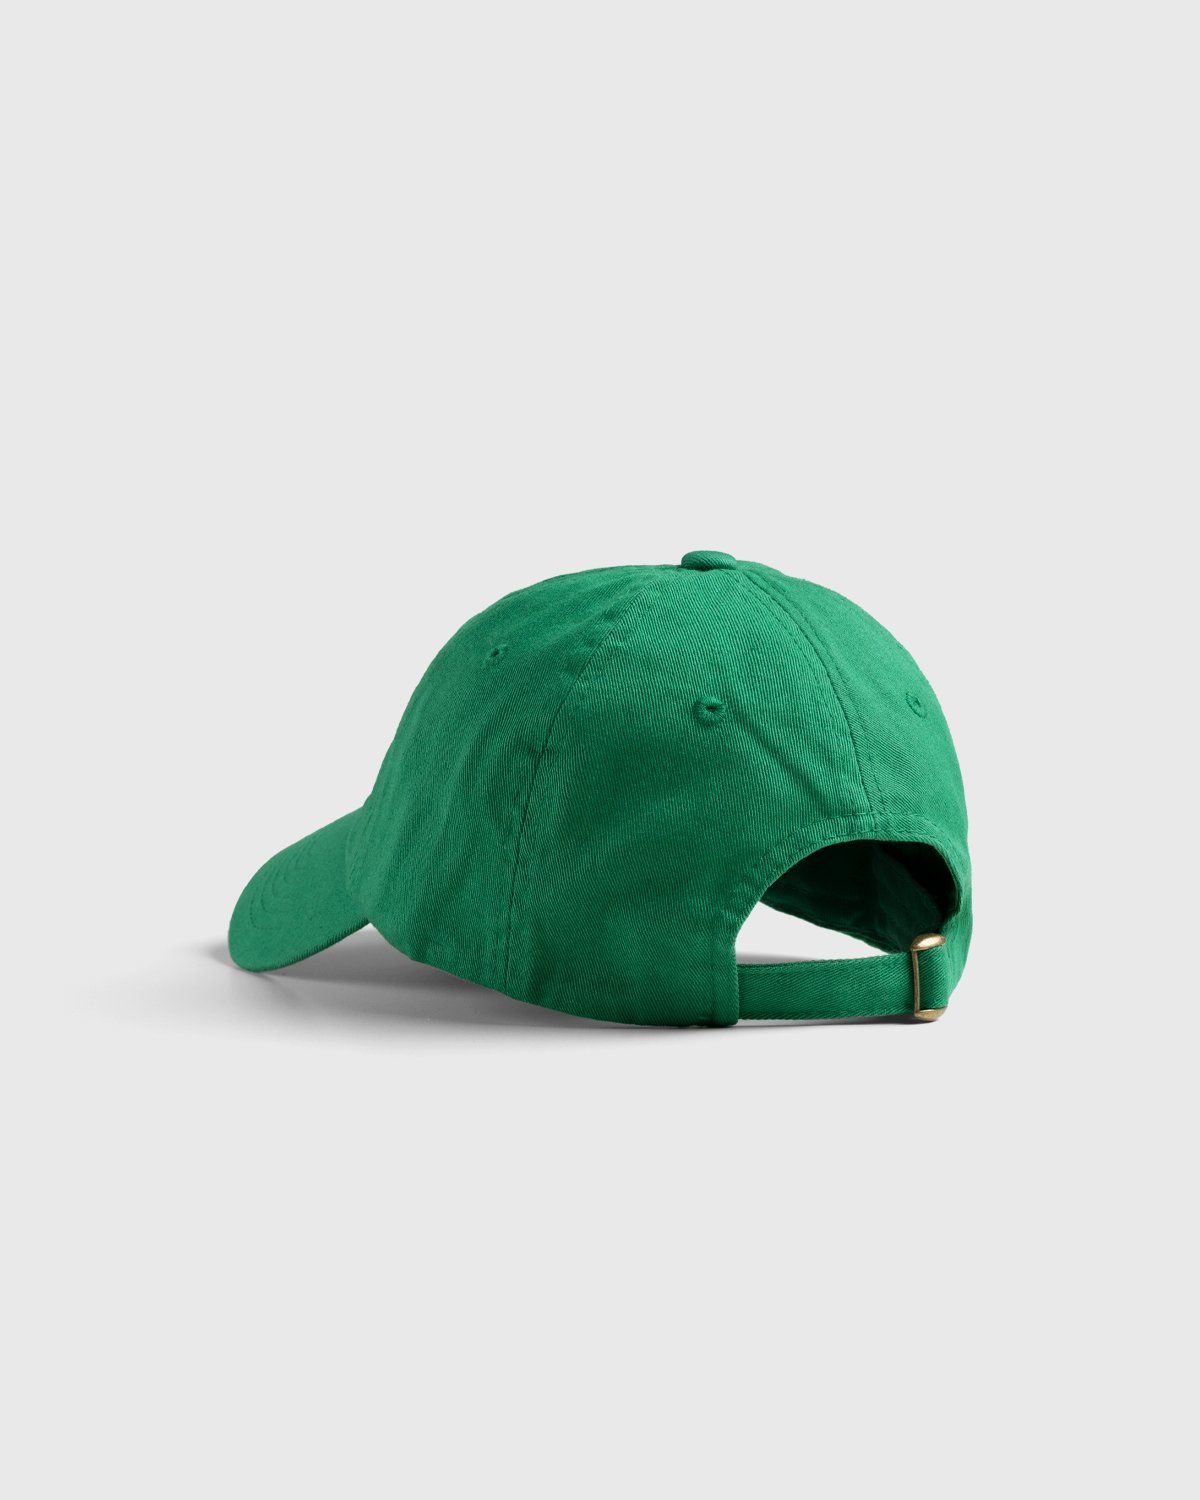 HO HO COCO – Handle With Care Cap Green - Hats - Green - Image 3